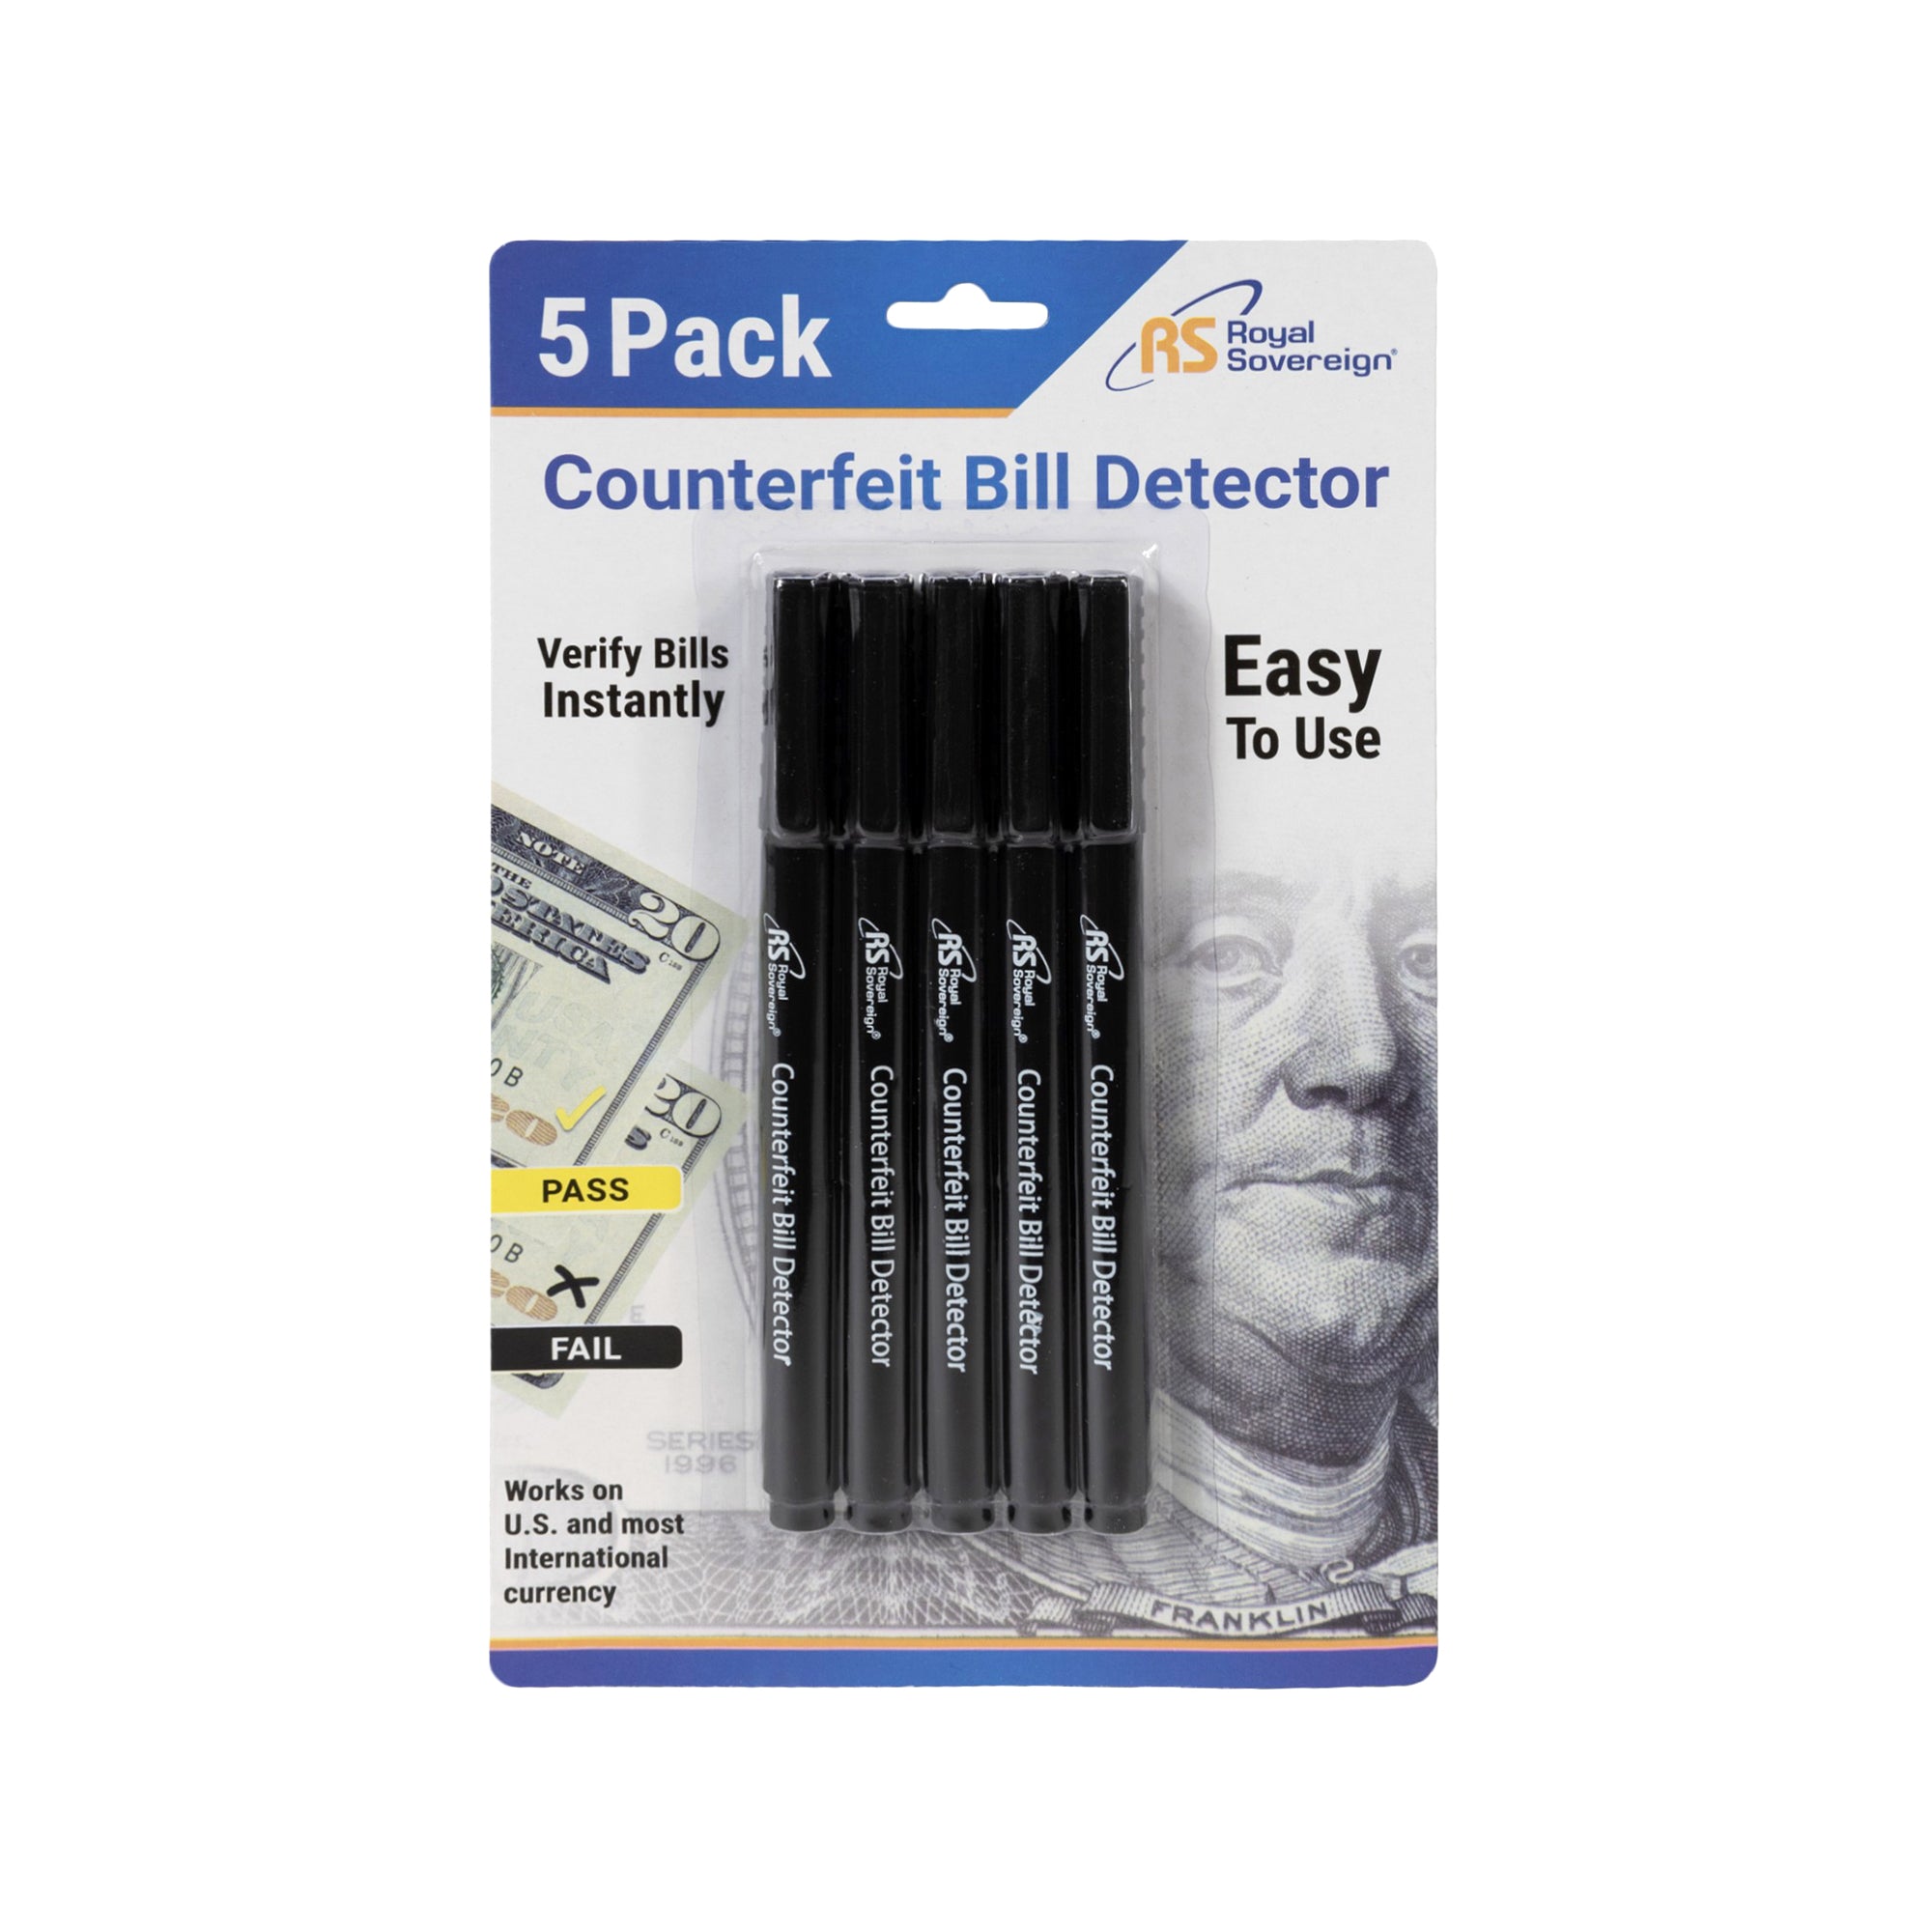 RCD-1805-RS, Counterfeit Bill Detection Pens, 5 Pack